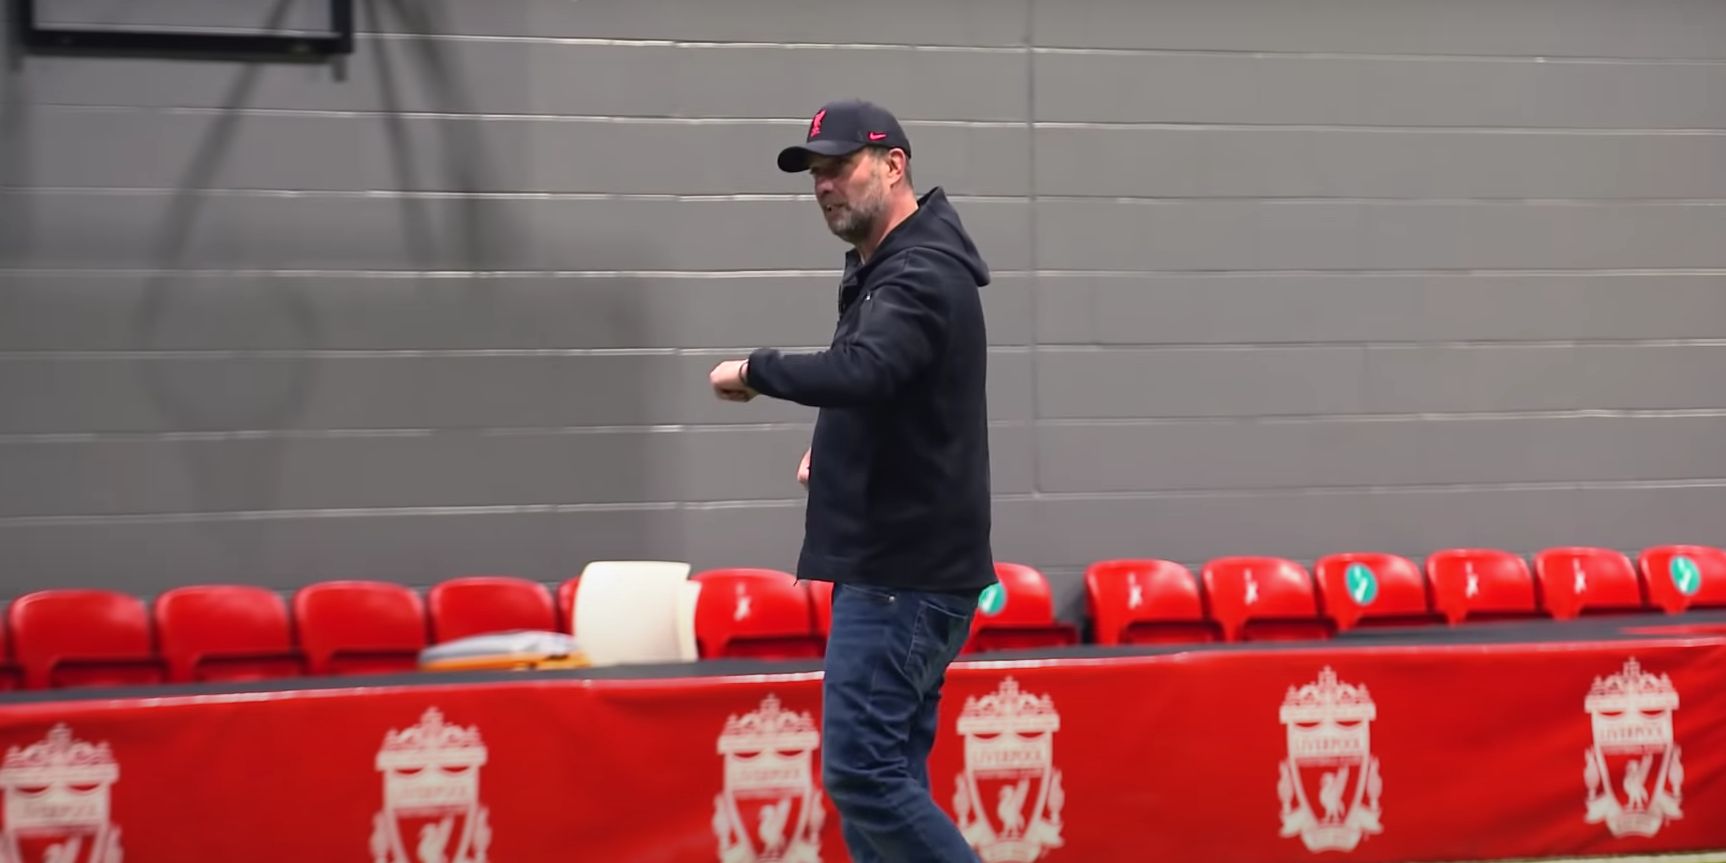 (Video) “You can find my volleys on YouTube” – Jurgen Klopp reminisces about his playing days and reminds people of his great goals